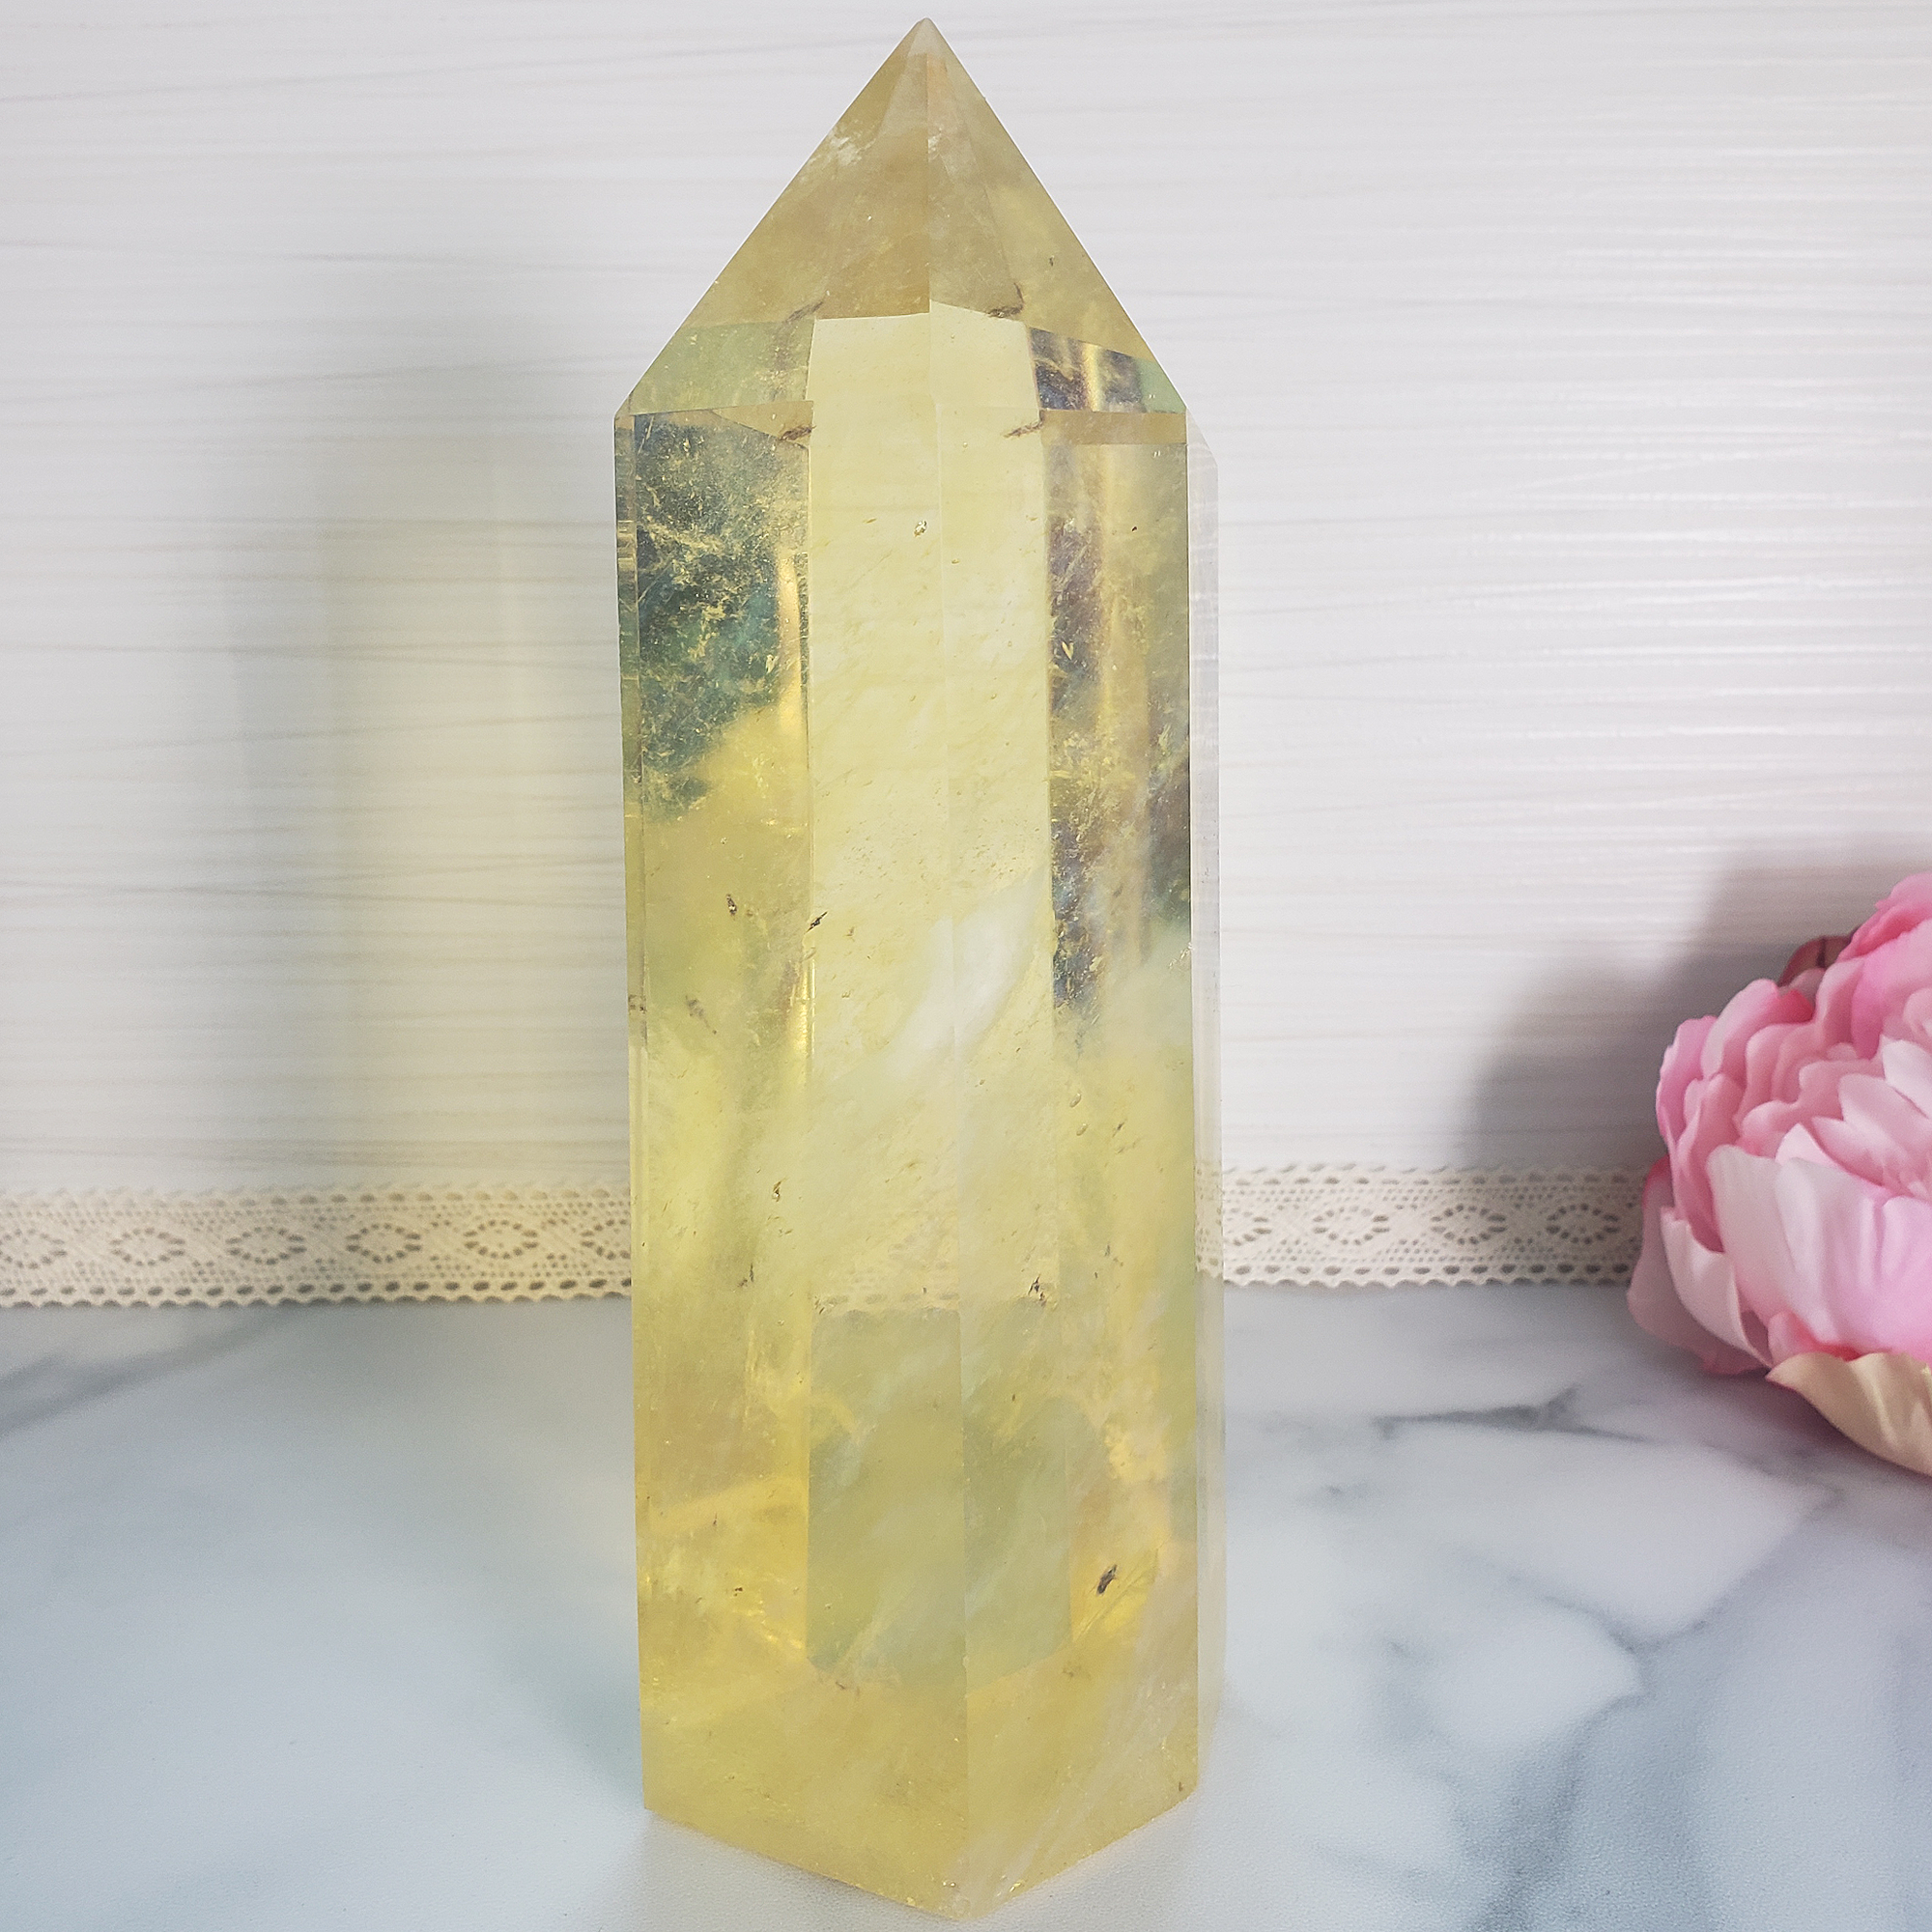 Unique JUMBO Yellow Obsidian Crystal Manmade Gemstone Tower - Etain - Obsidian Tower in Yellow